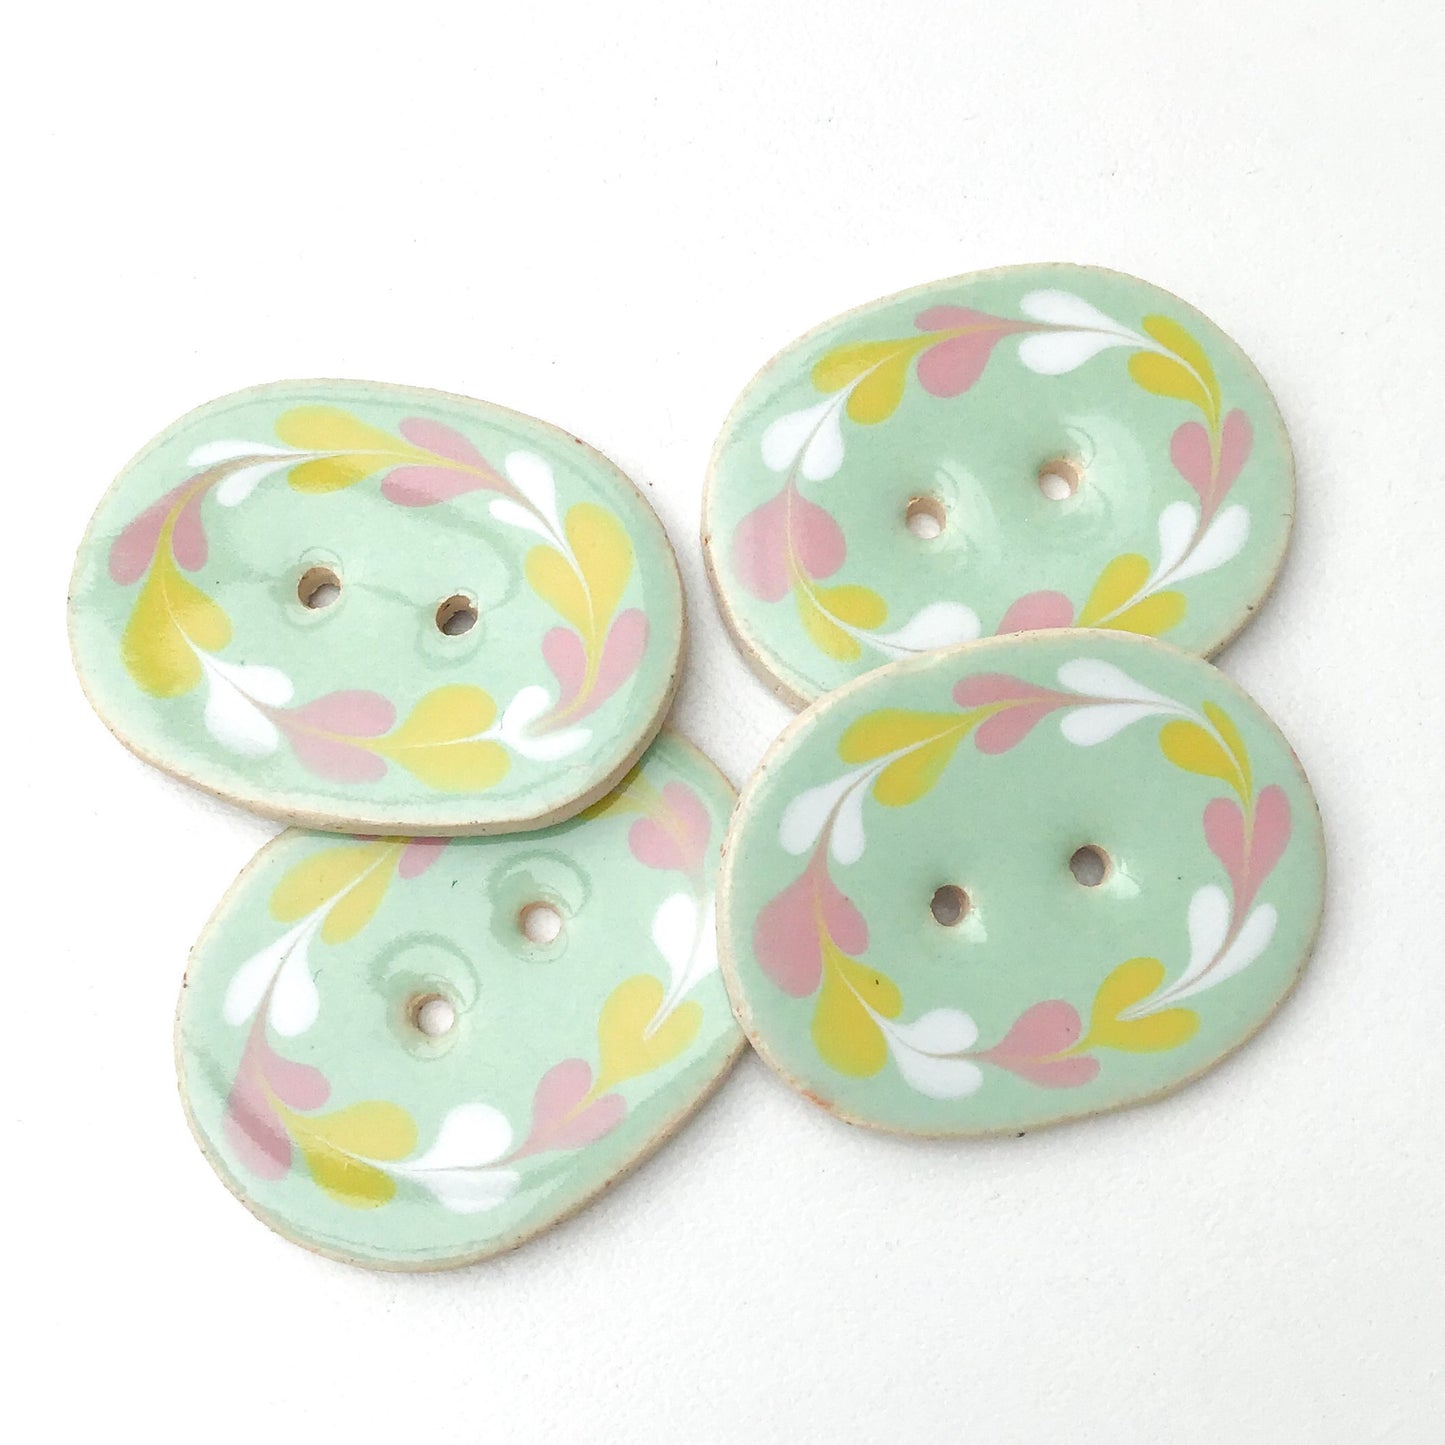 Decorative Ceramic Button with Floral Print Border - Aqua - Mint Green - Blue Clay Buttons - 1" x 1 1/4"